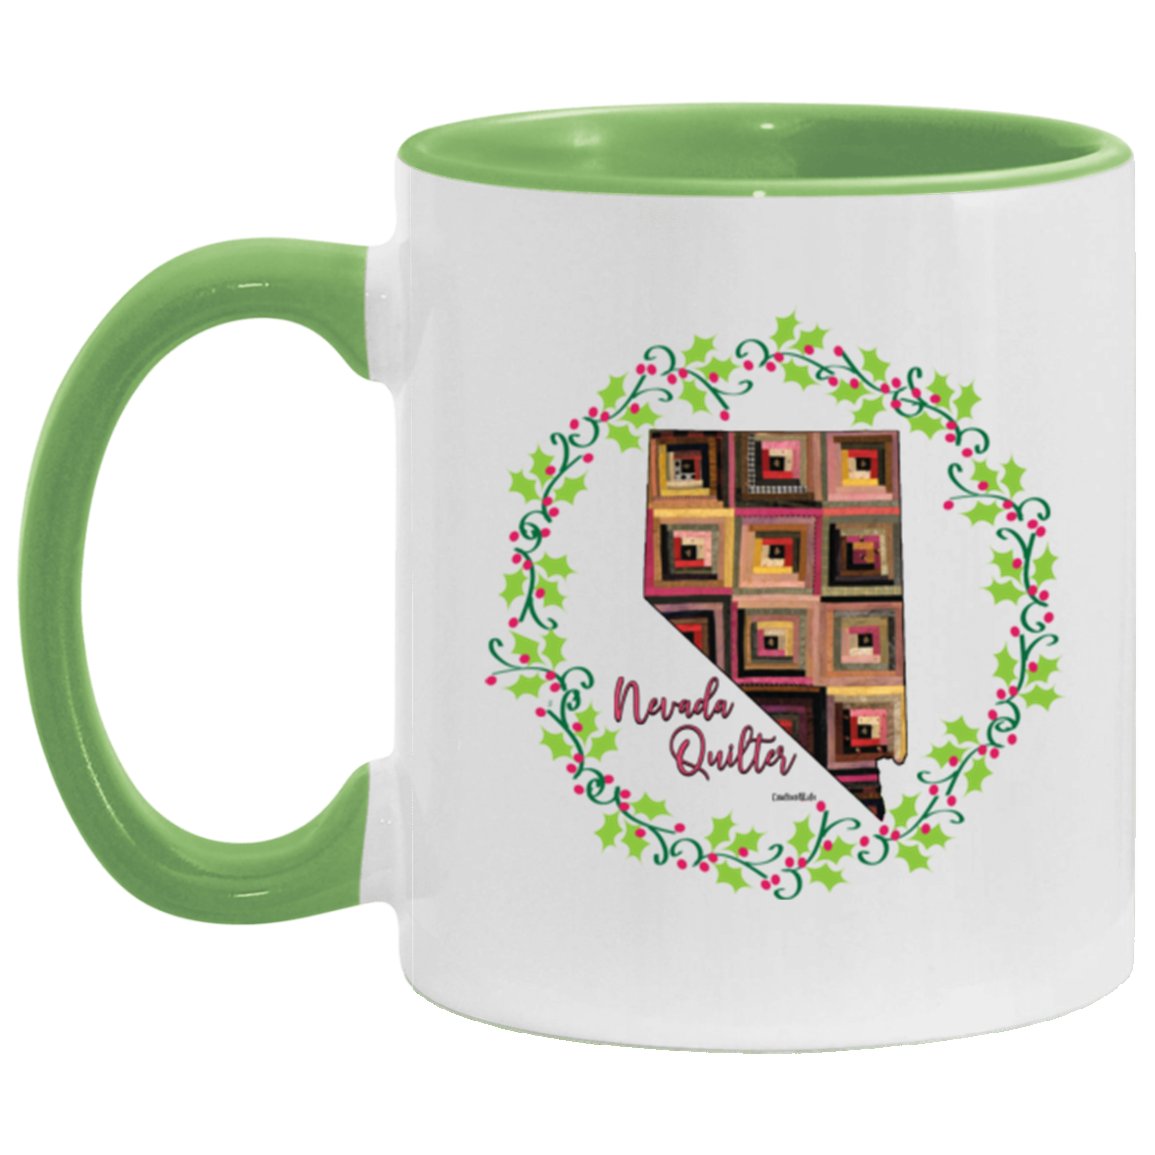 Nevada Quilter Christmas Accent Mug